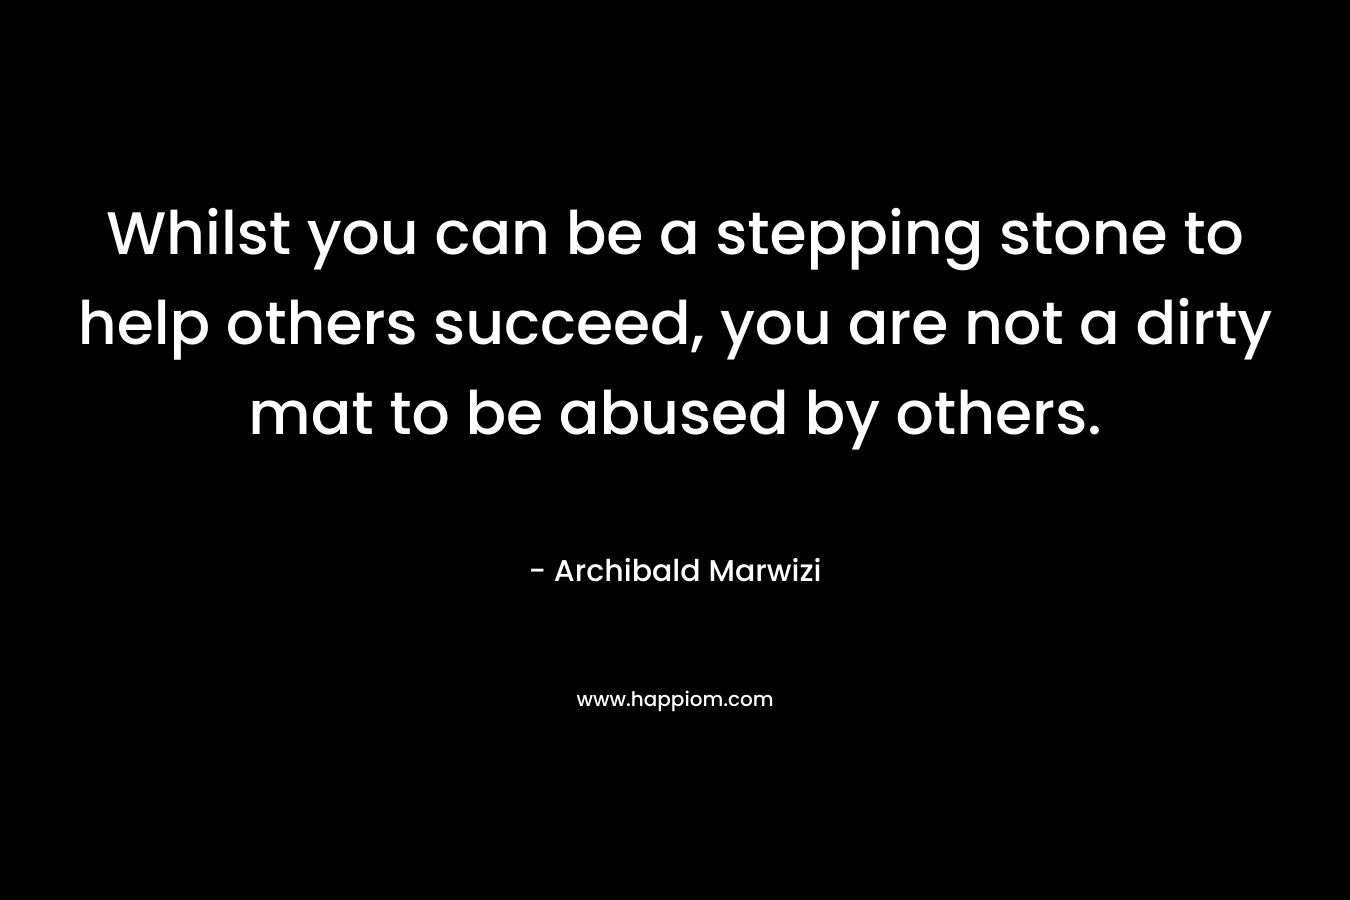 Whilst you can be a stepping stone to help others succeed, you are not a dirty mat to be abused by others.